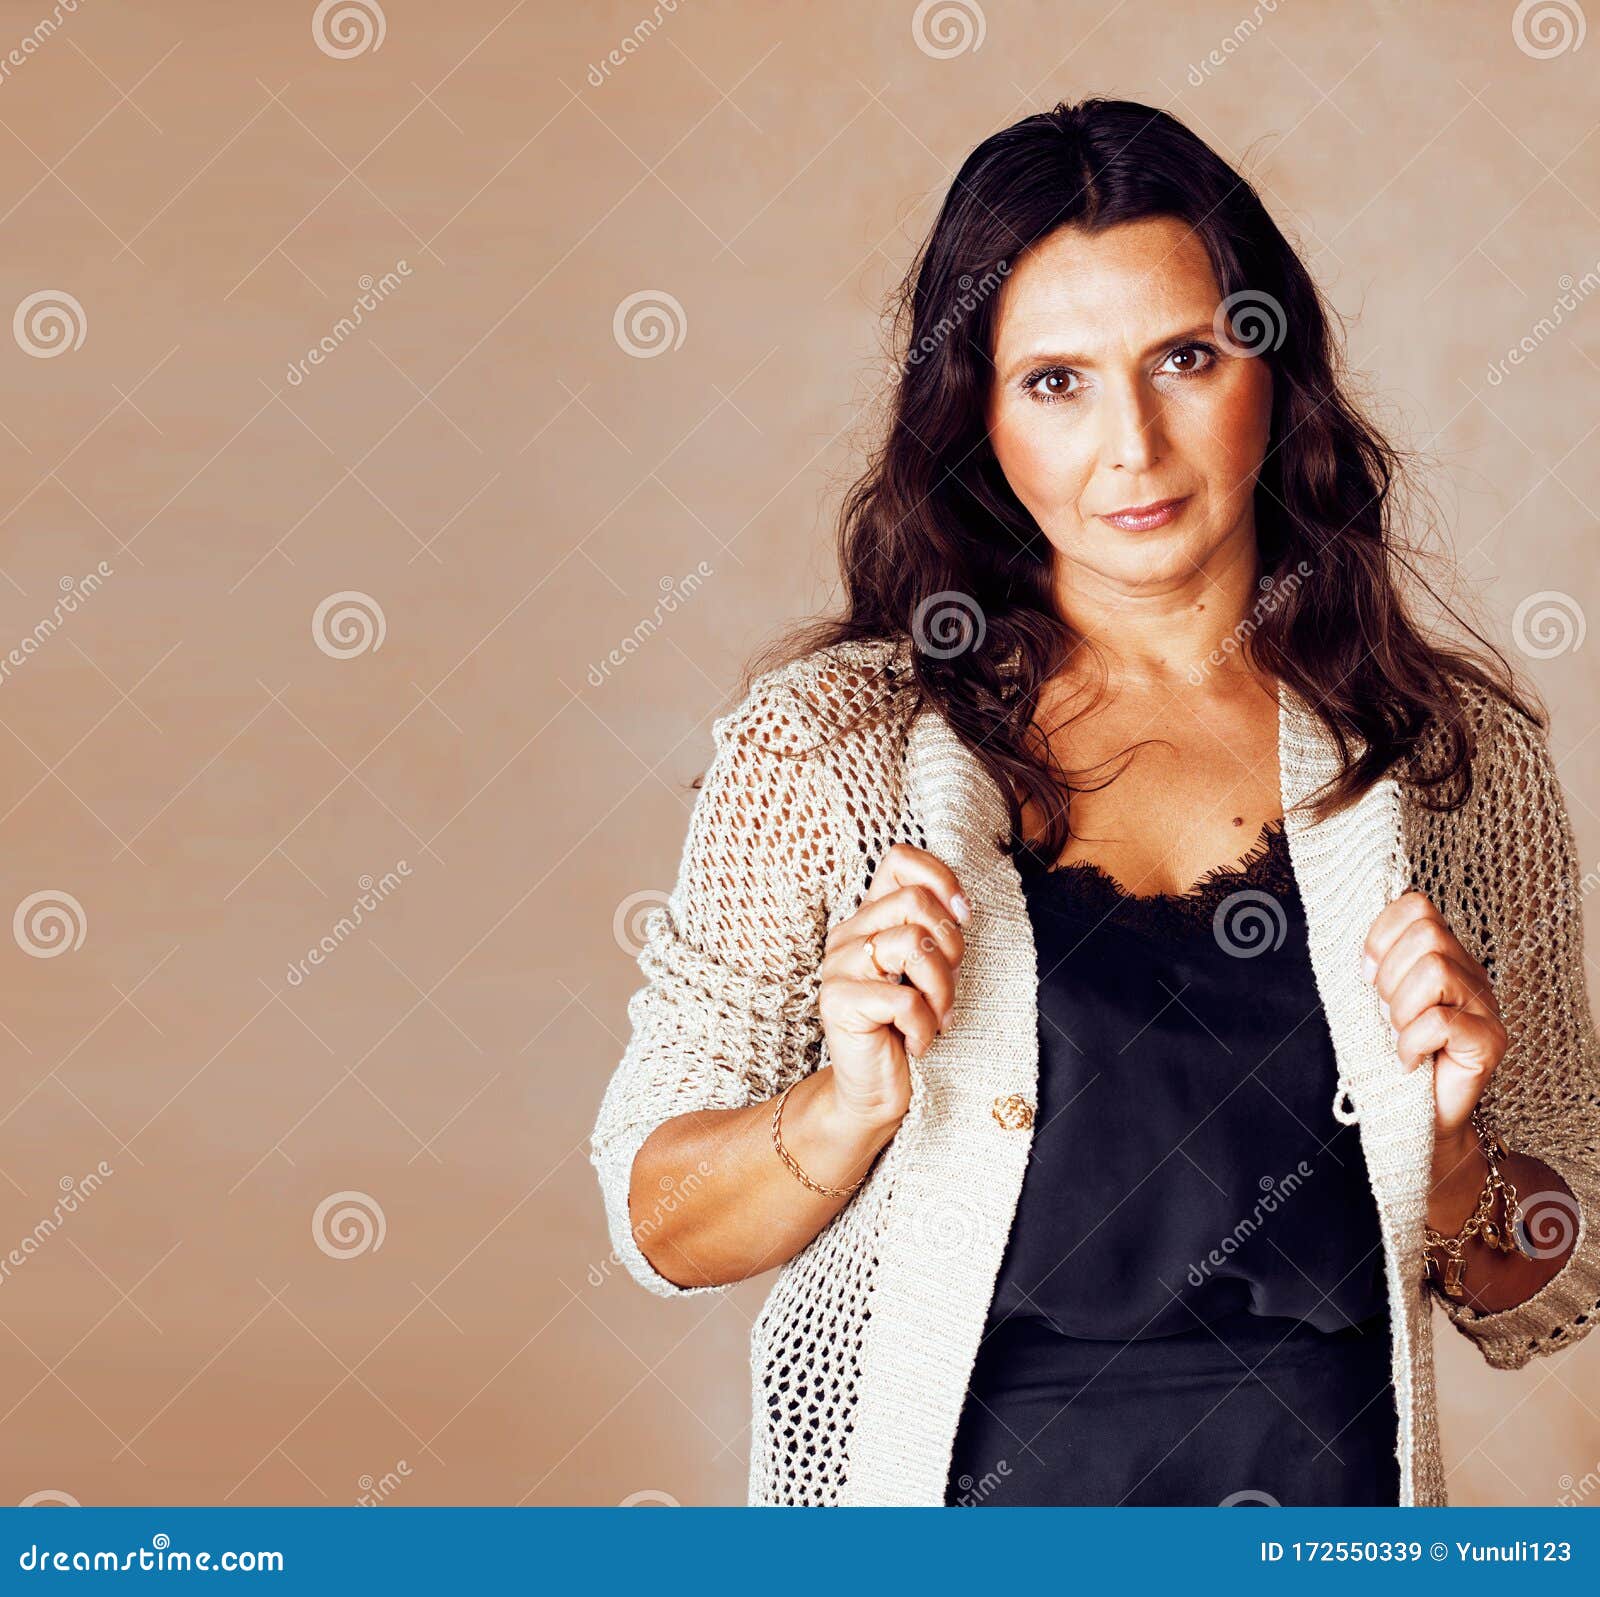 Pretty Brunette Confident Mature Woman Posing Cheerful On Warm Brown 